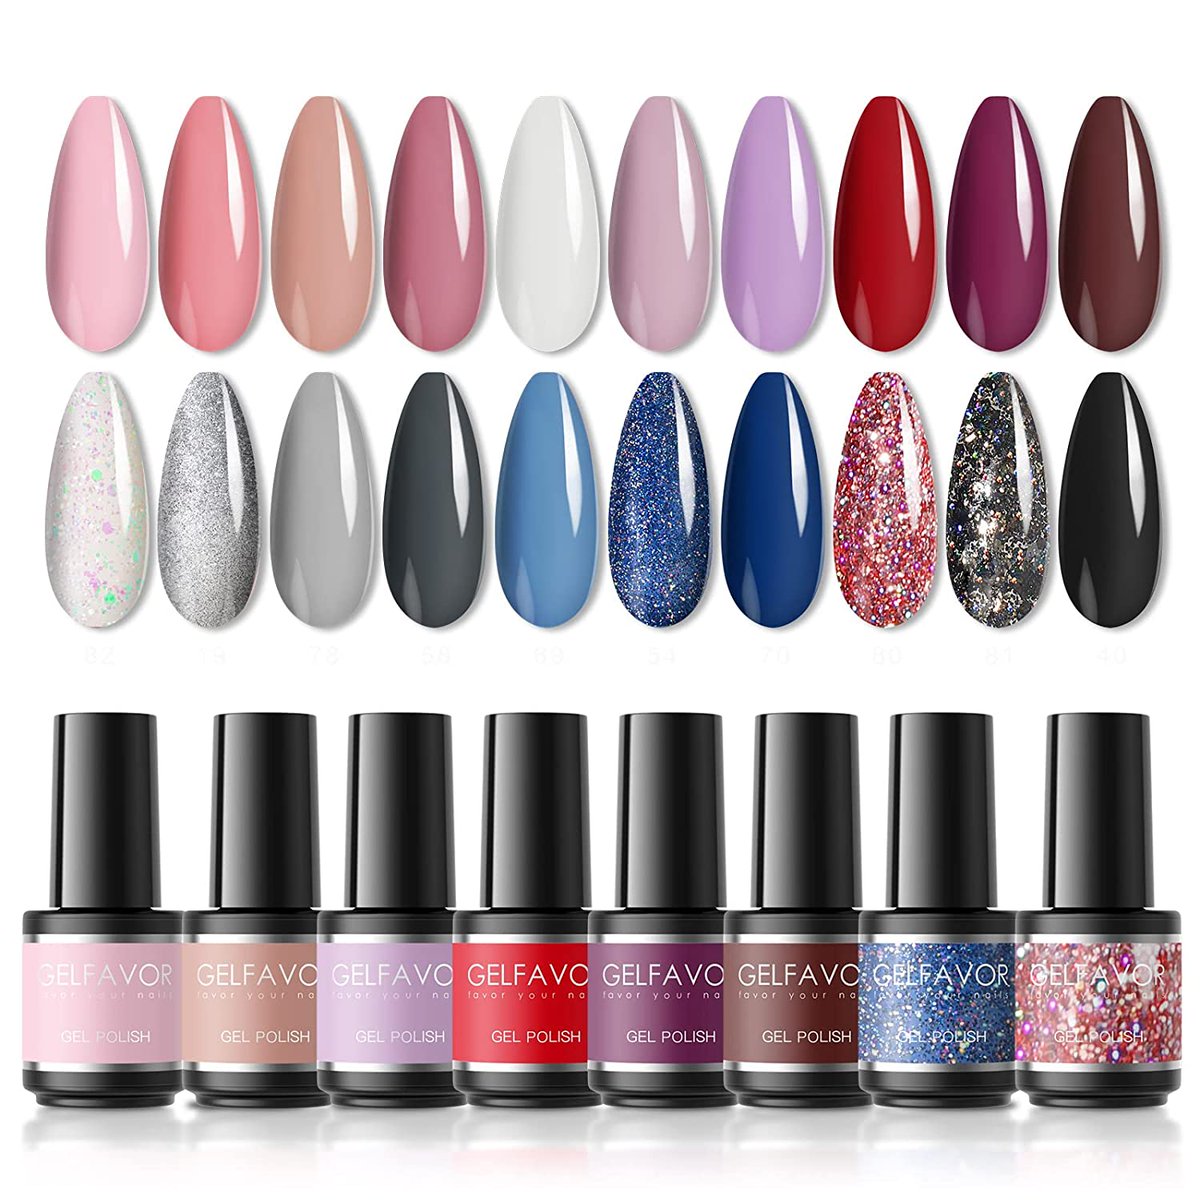 💅 Get salon-quality nails from the comfort of your home with this amazing deal! 💅

✅ $11.49 for a 24Pcs Gel Nail Polish Set

🔗 Link to Deal; amzn.to/3WEp1Tj

#GelNailPolish #NailArt #Manicure #AtHomeNails #LimitedTimeOffer